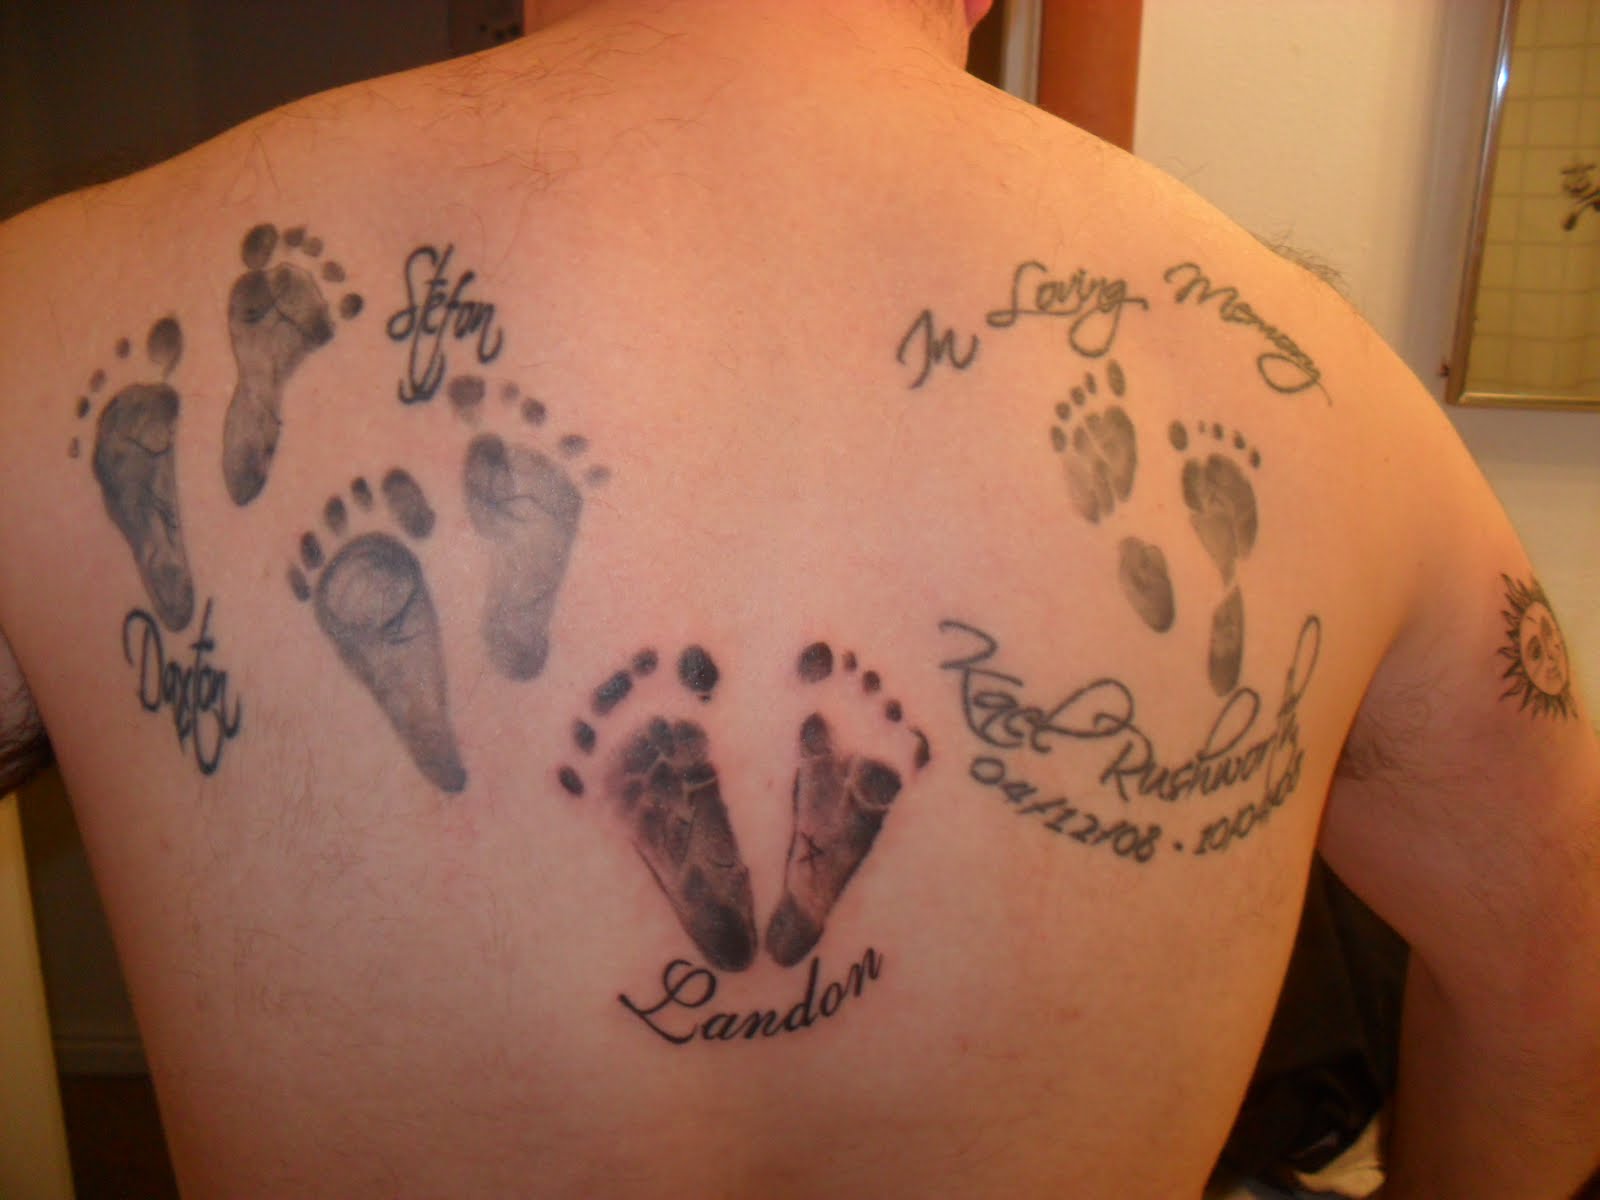 Memorial Black Ink Feet Prints Tattoo On Upper Back For Brother